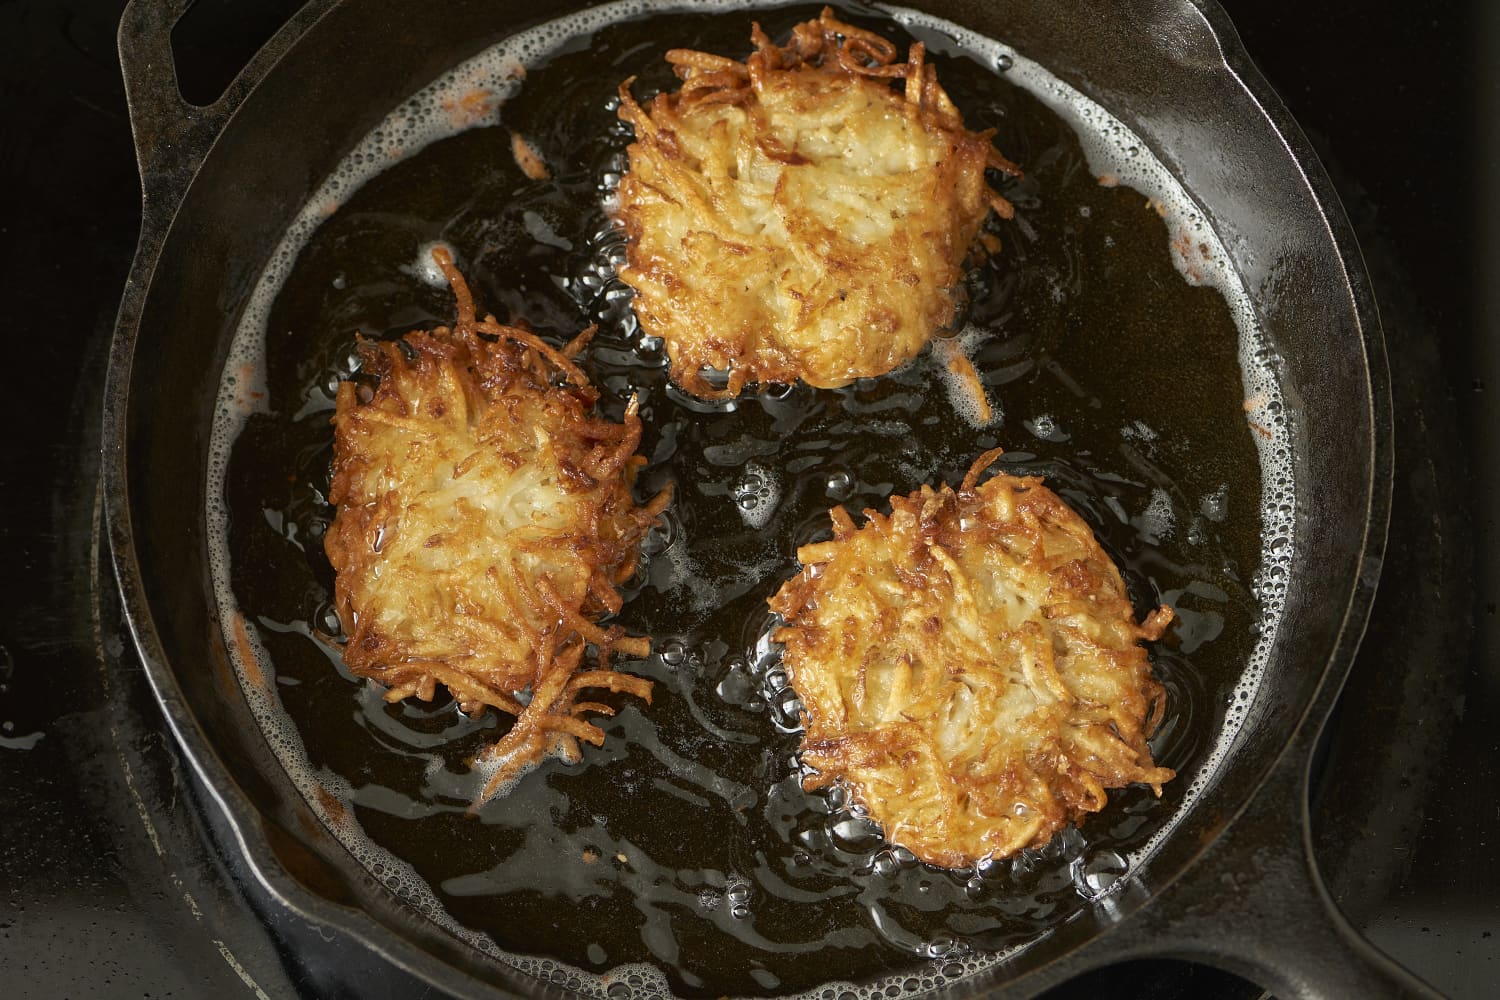 My wife deep fried some potato pancakes and I think it burned off all my  seasoning. Any insight on whether or not we should deep fry stuff in a  skillet? Any advice